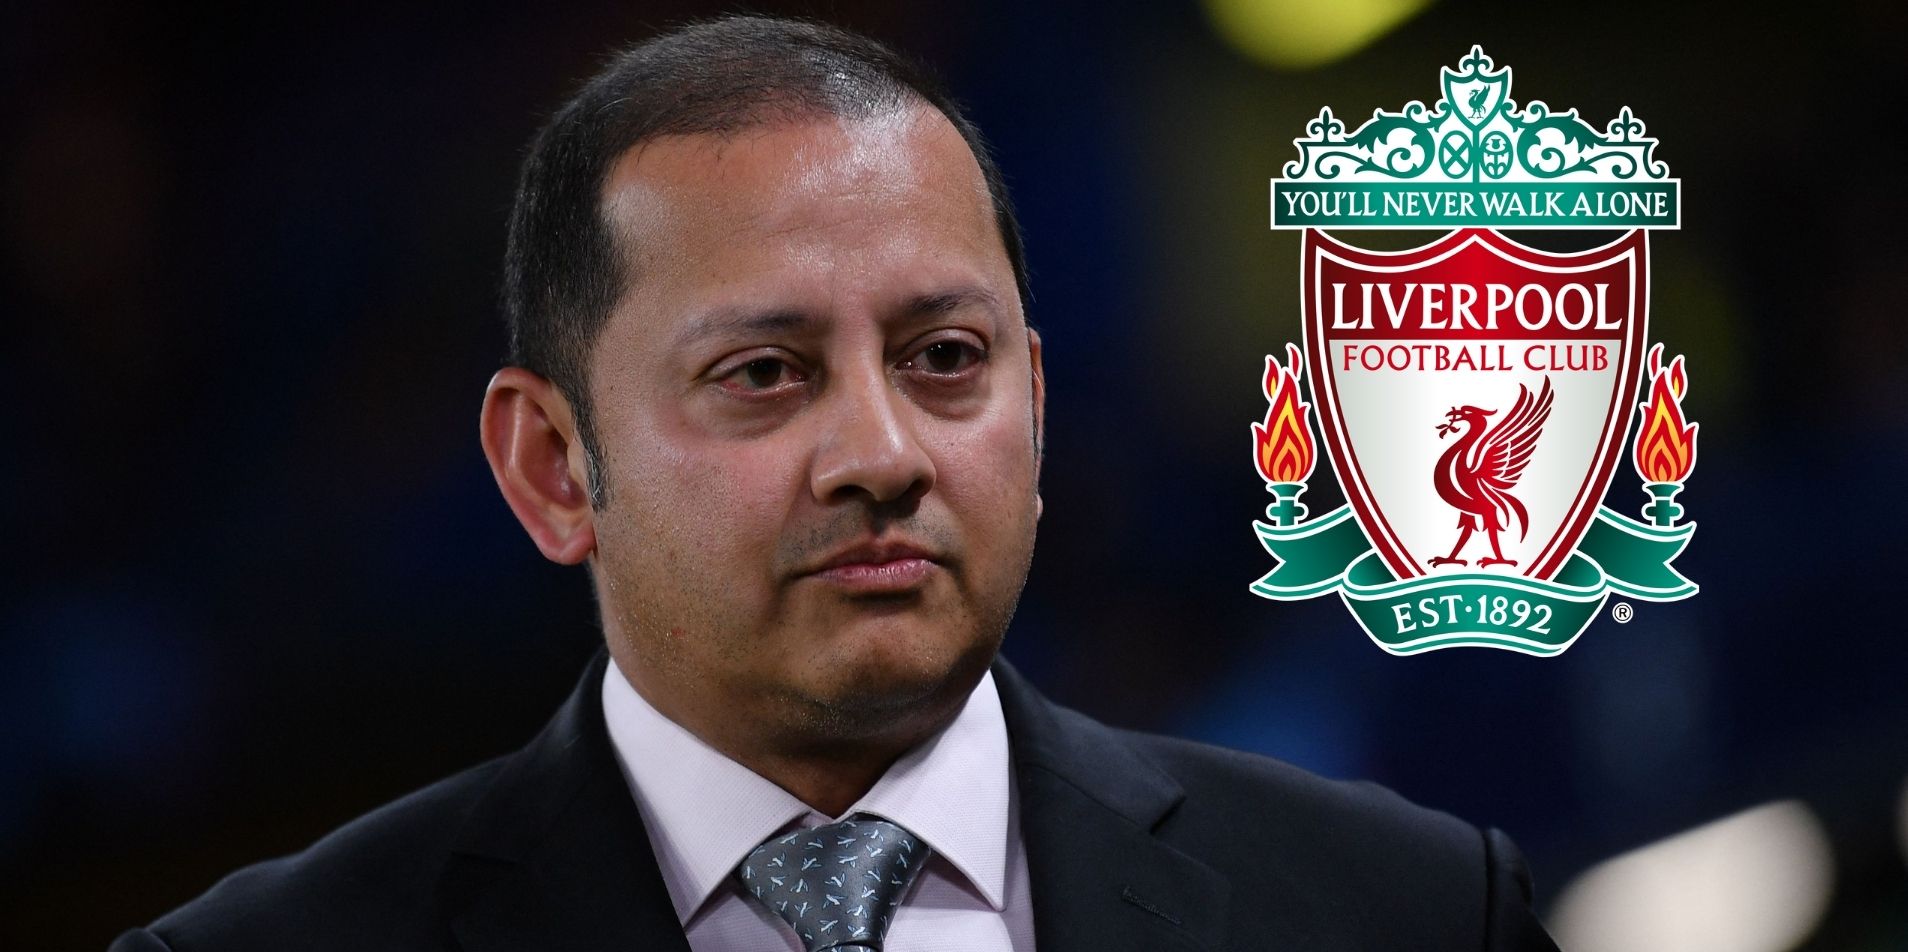 Reportedly leaked audio of Valencia chairman reveals x-rated comments about Liverpool as a city